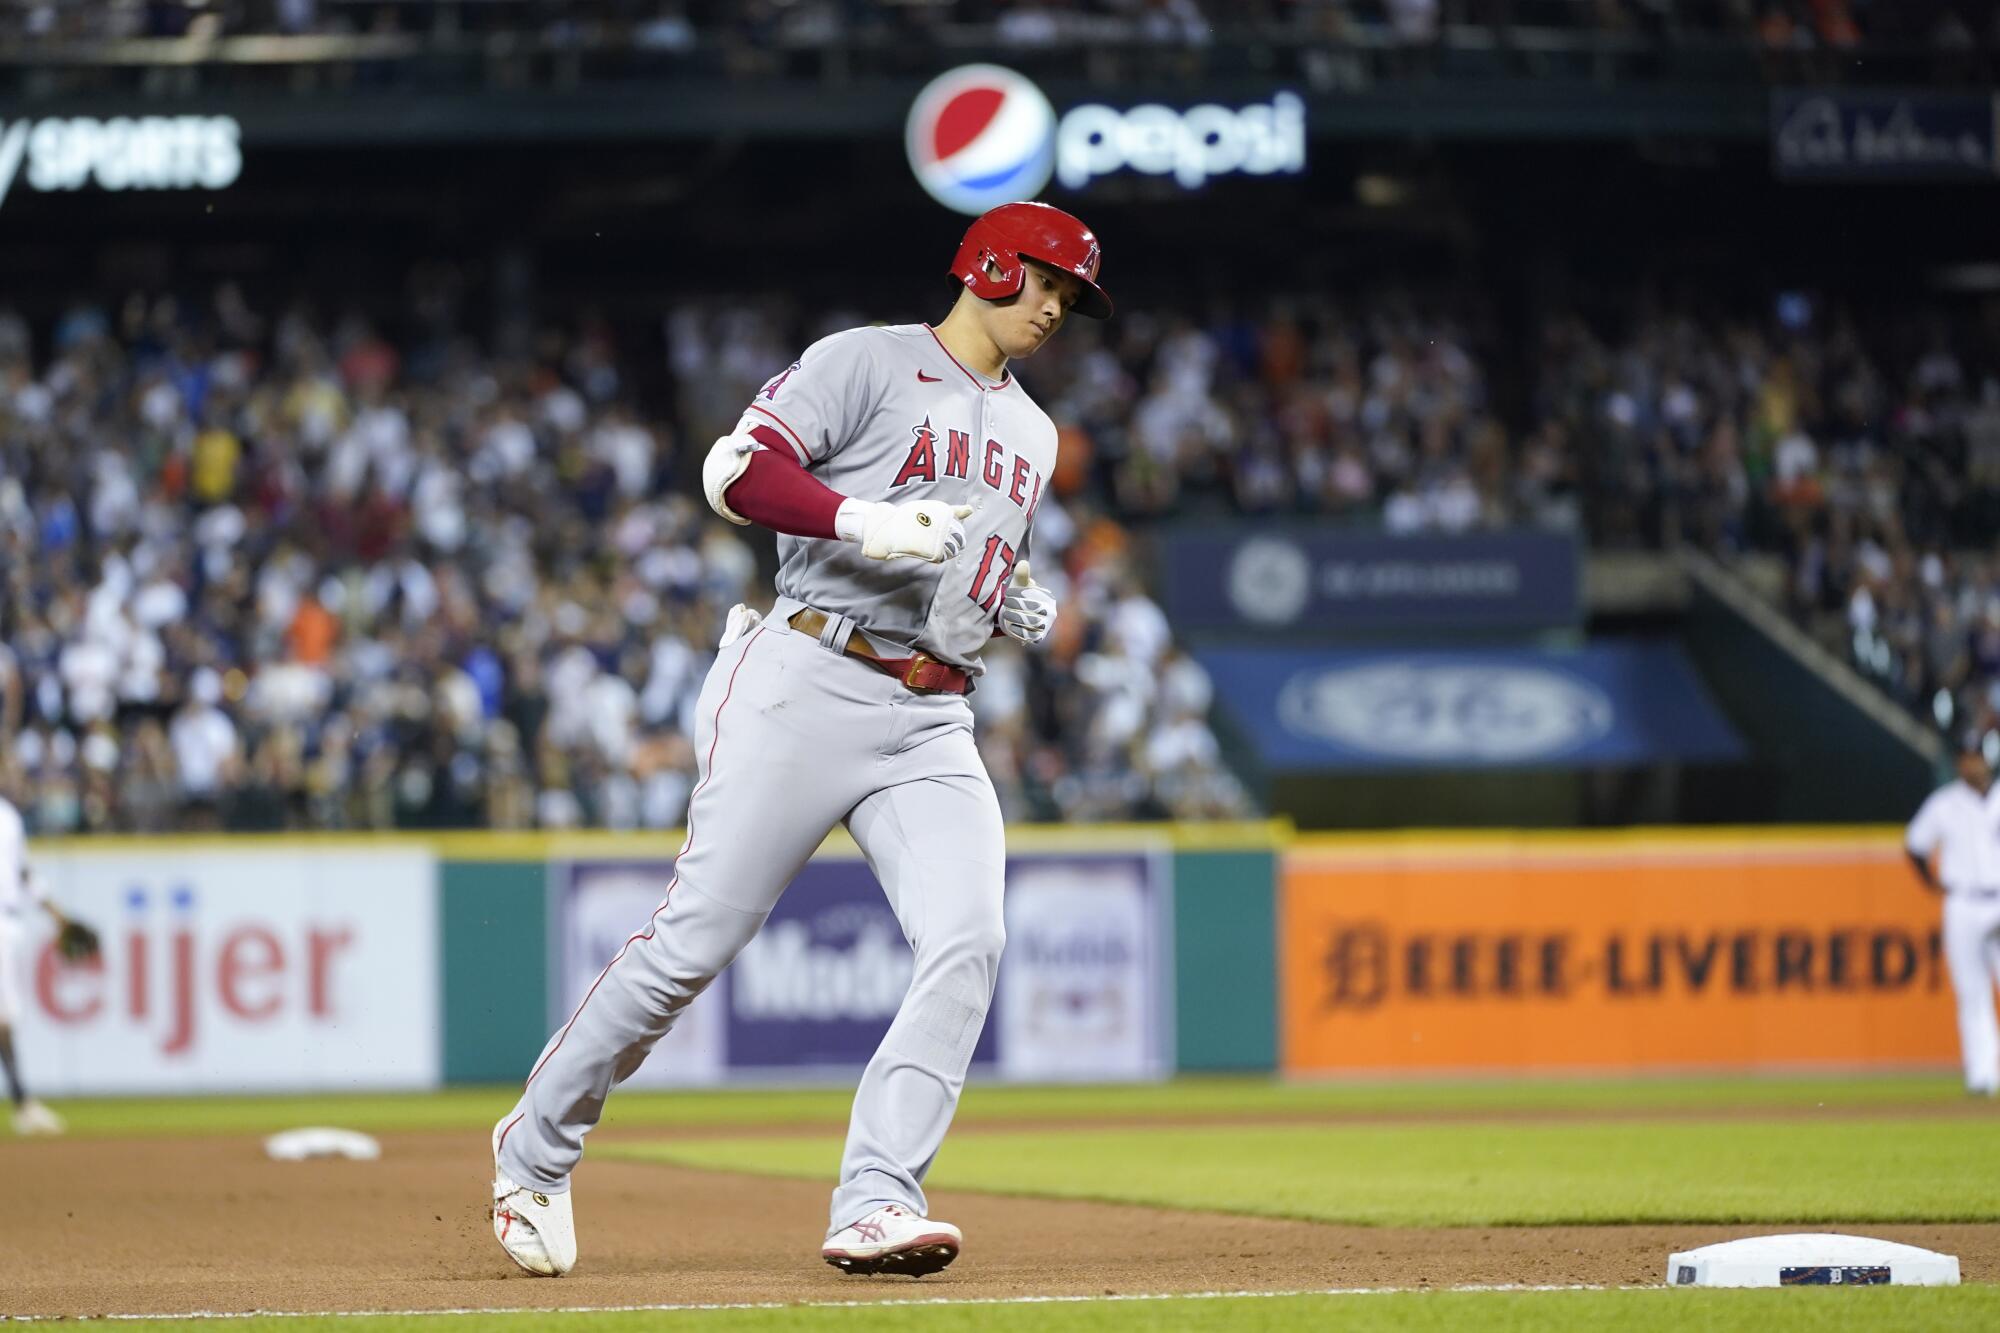 Angels' Shohei Ohtani rounds third base after hitting a solo home run.